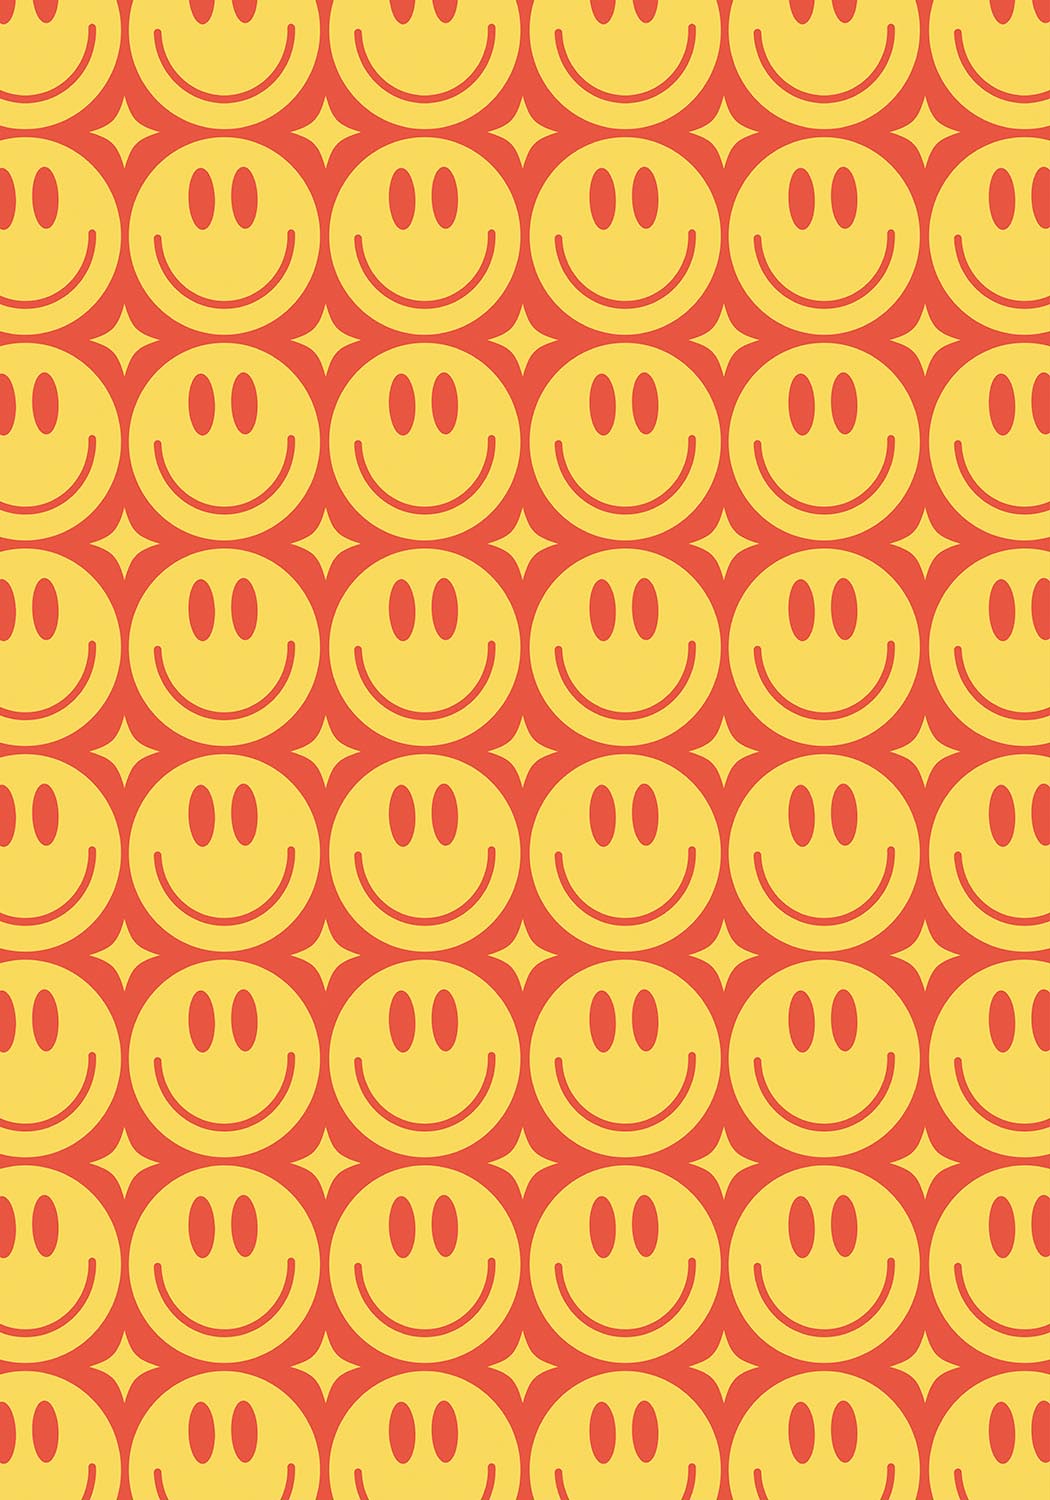 Happy faces poster